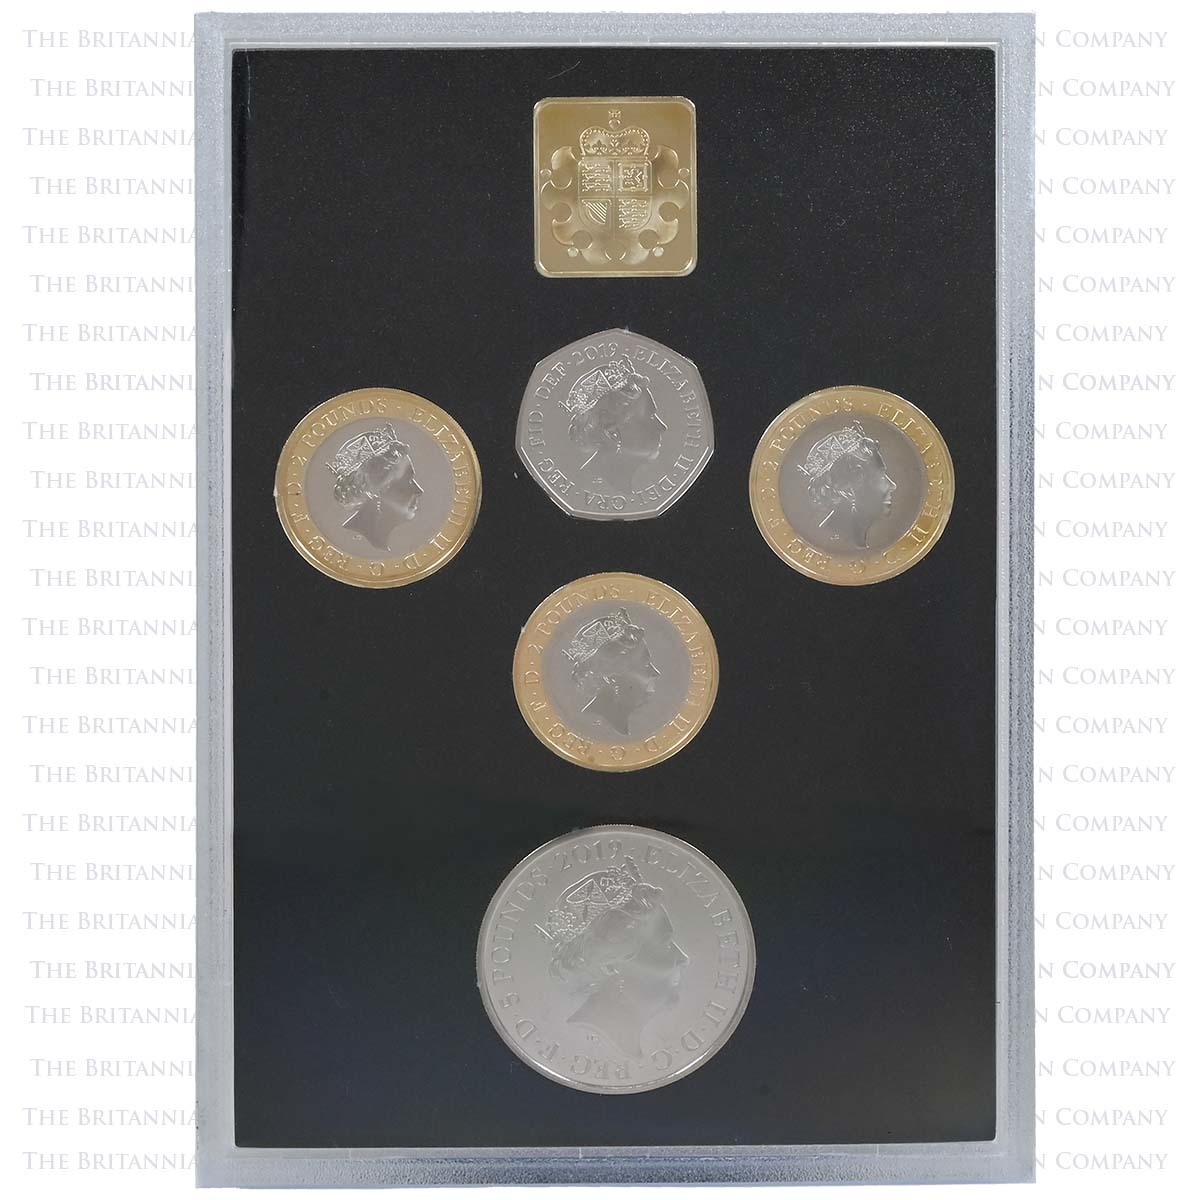 2019-proof-coin-set-collector-edtition-003-m